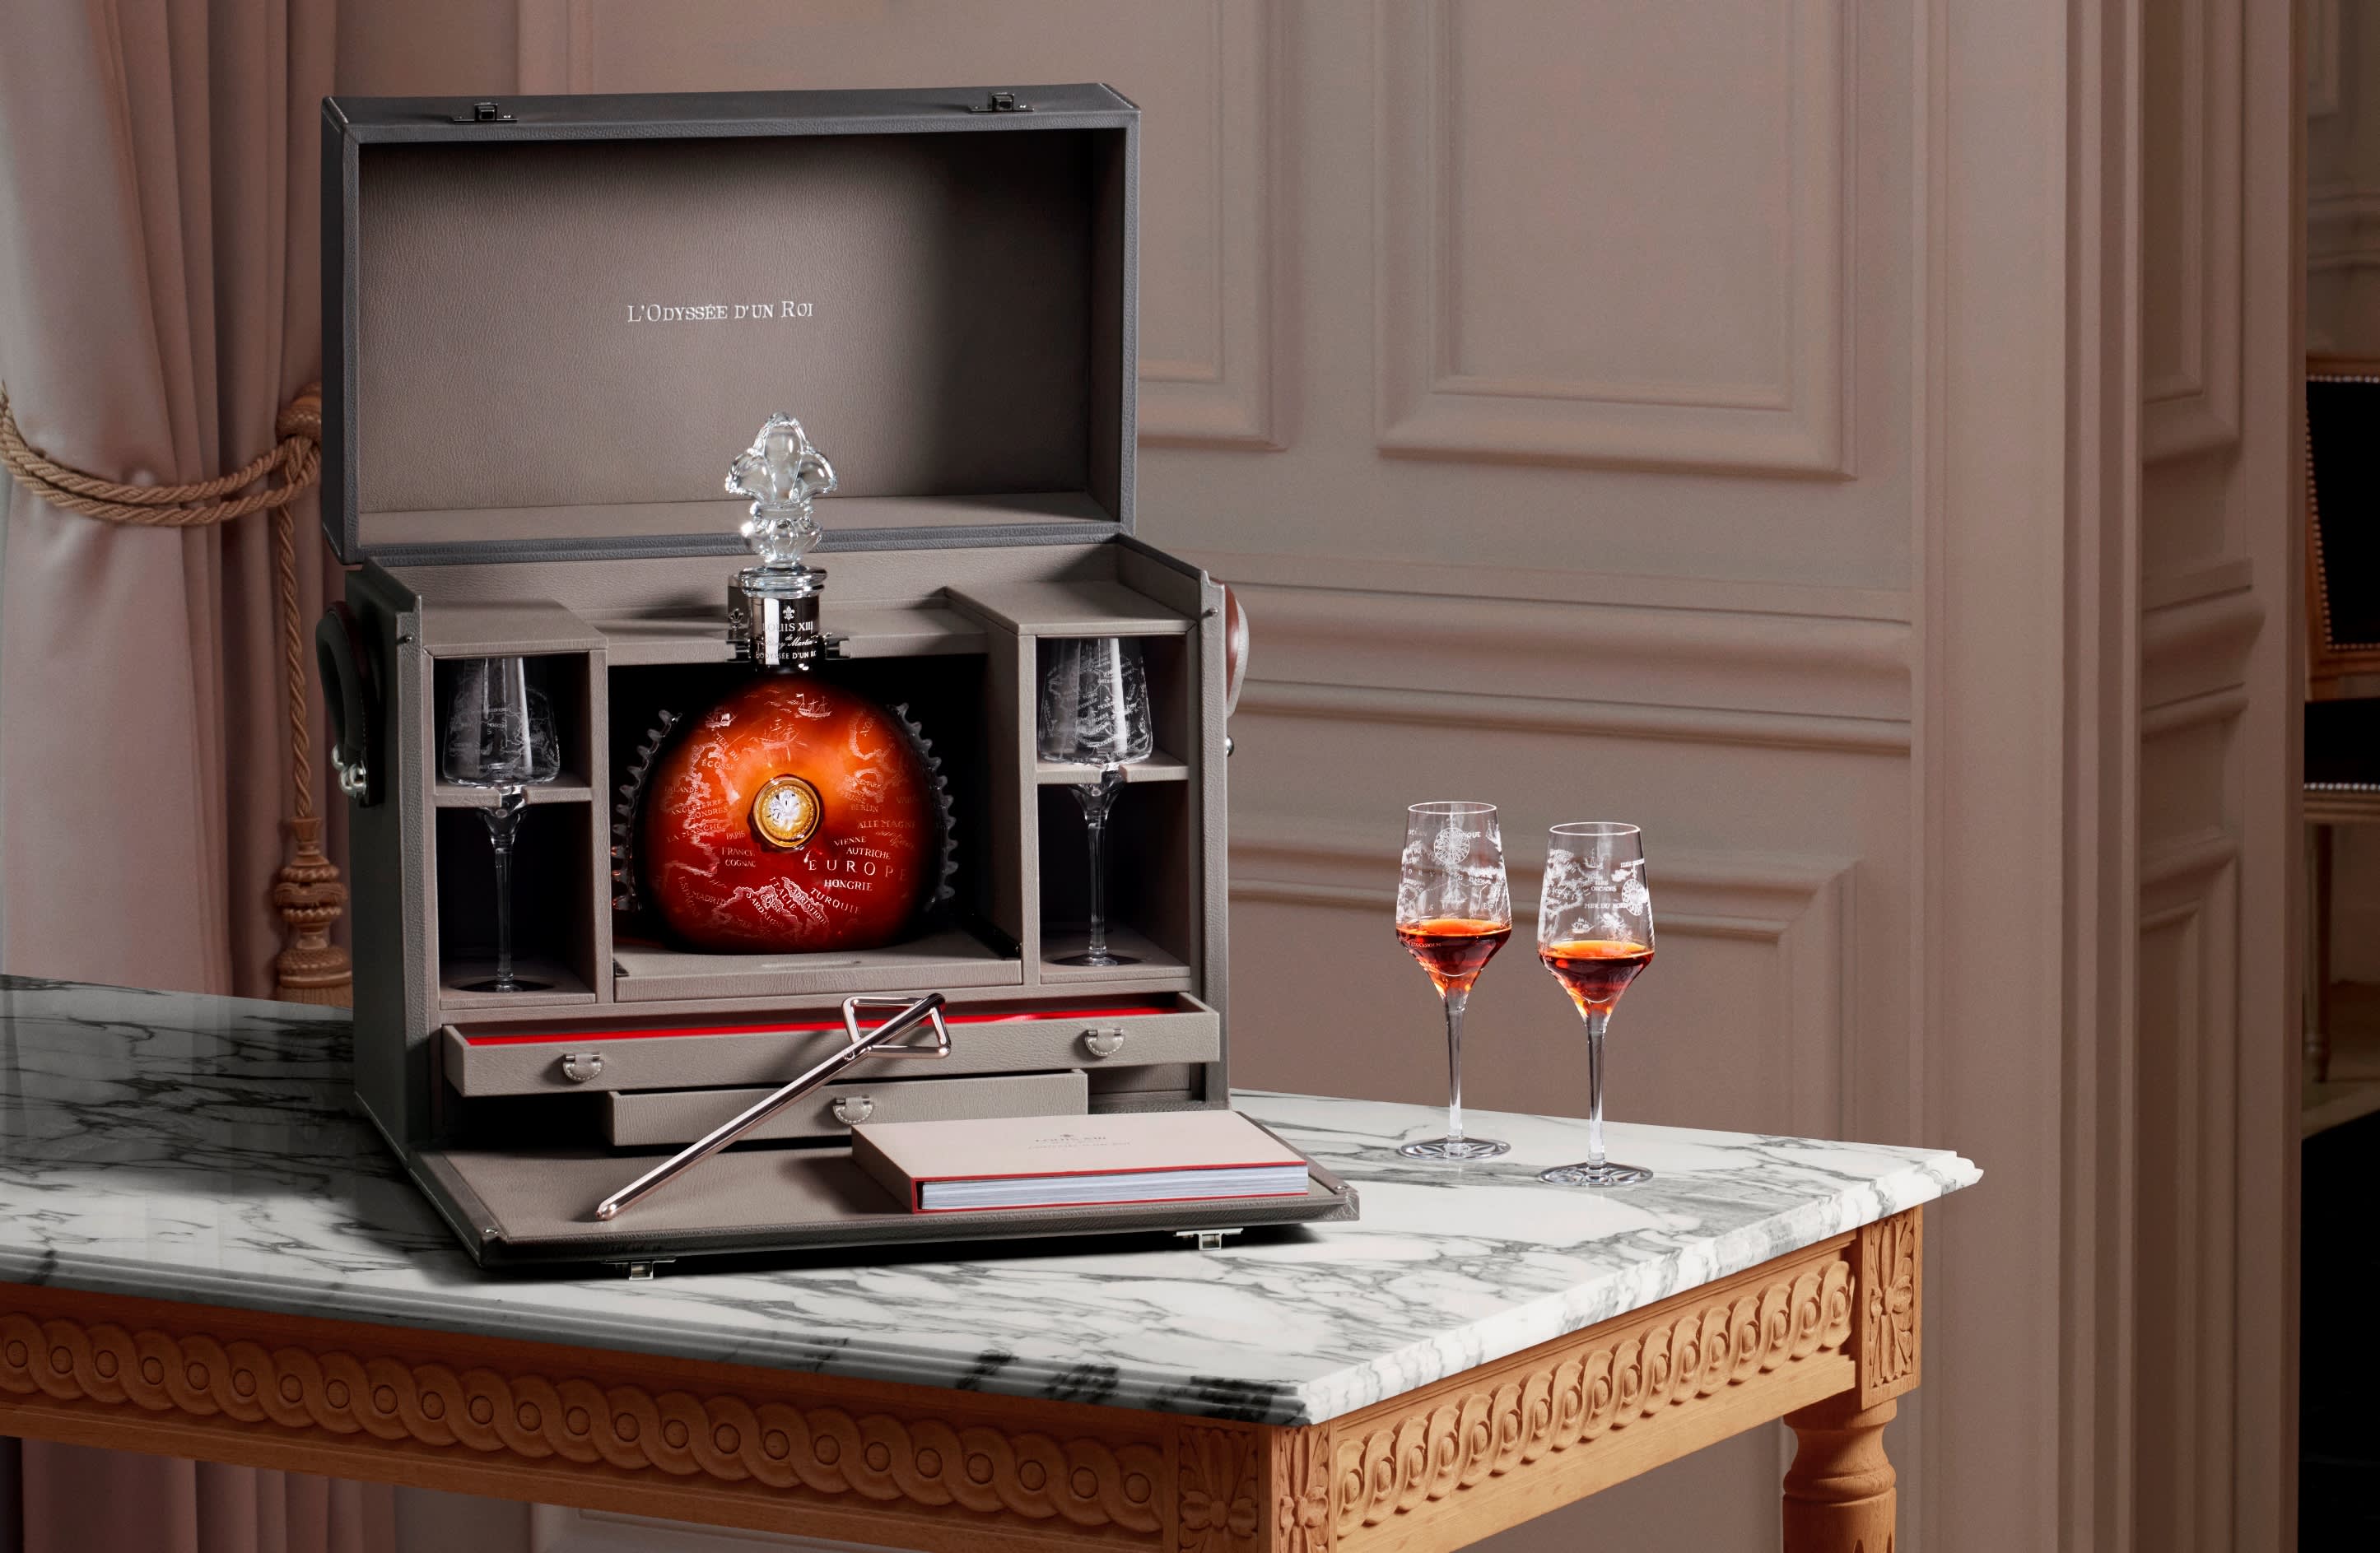 Hennessy Decanter & Louis Vuitton Trunk